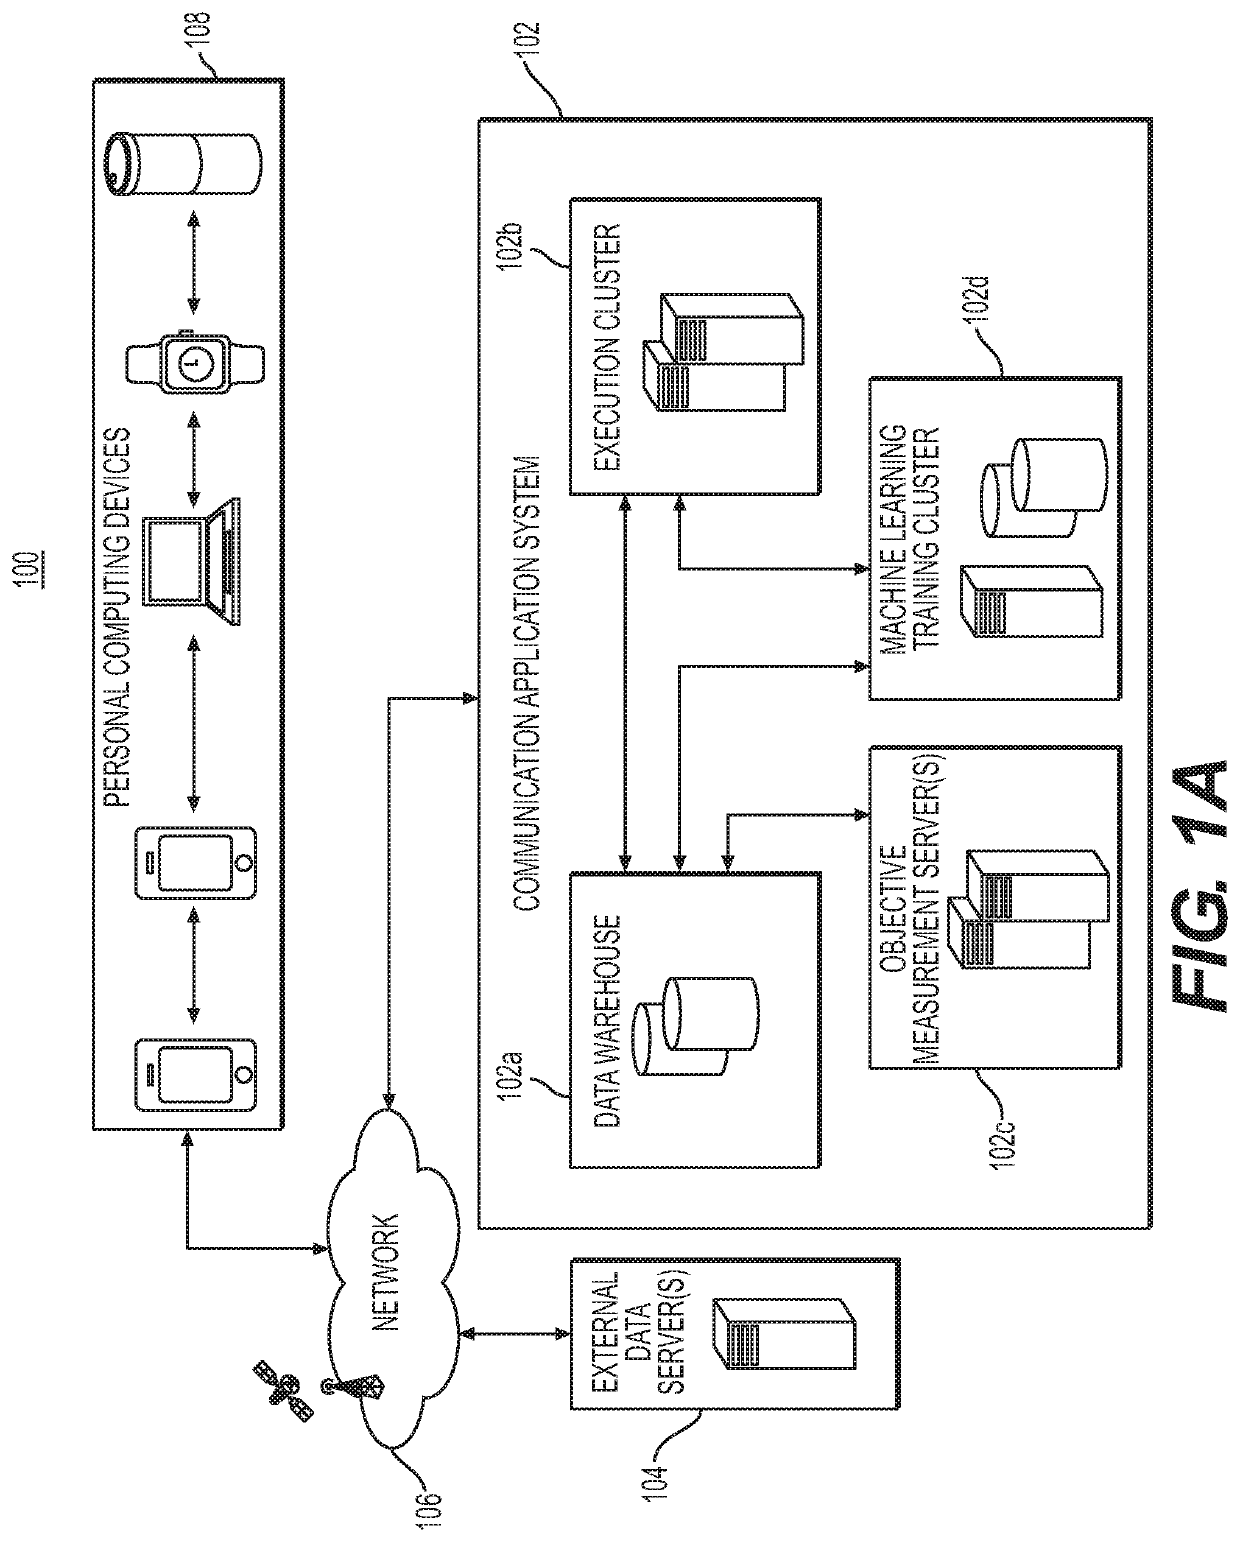 Systems and methods for initiating communication between users based on machine learning techniques